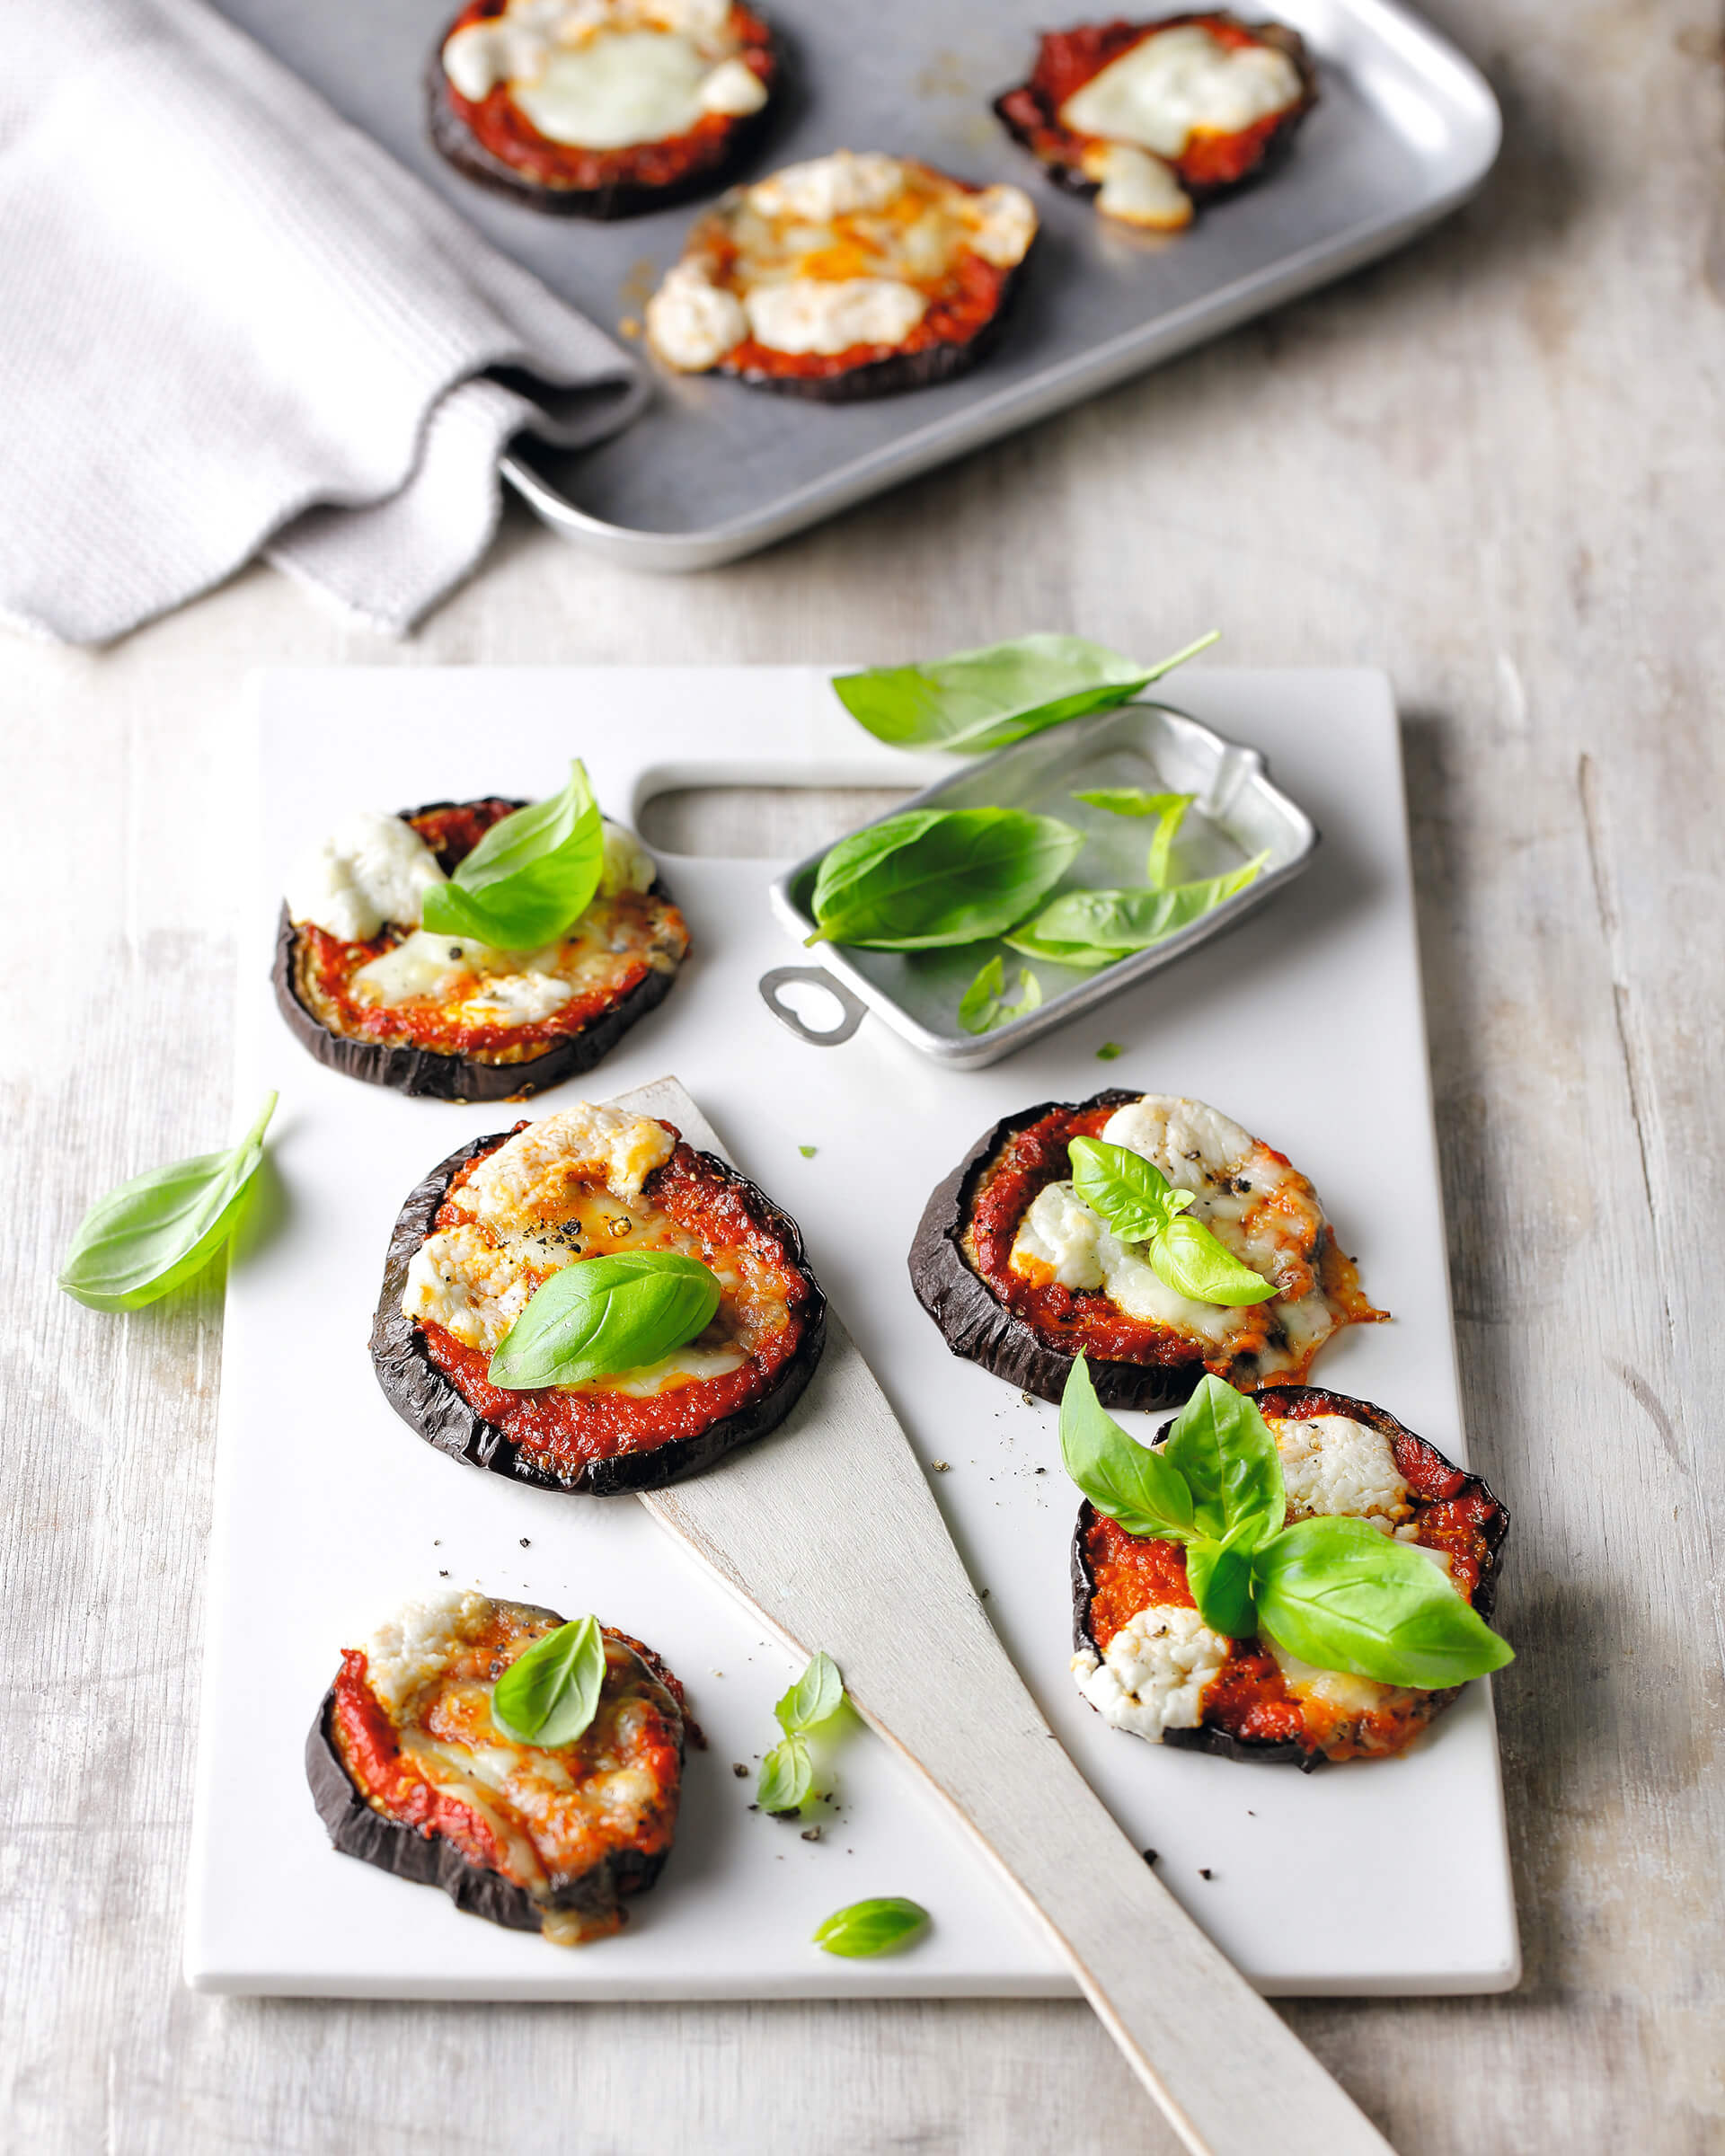 Eggplant rounds with toppings and basil garnish on a cutting board with a baking ban in the background.